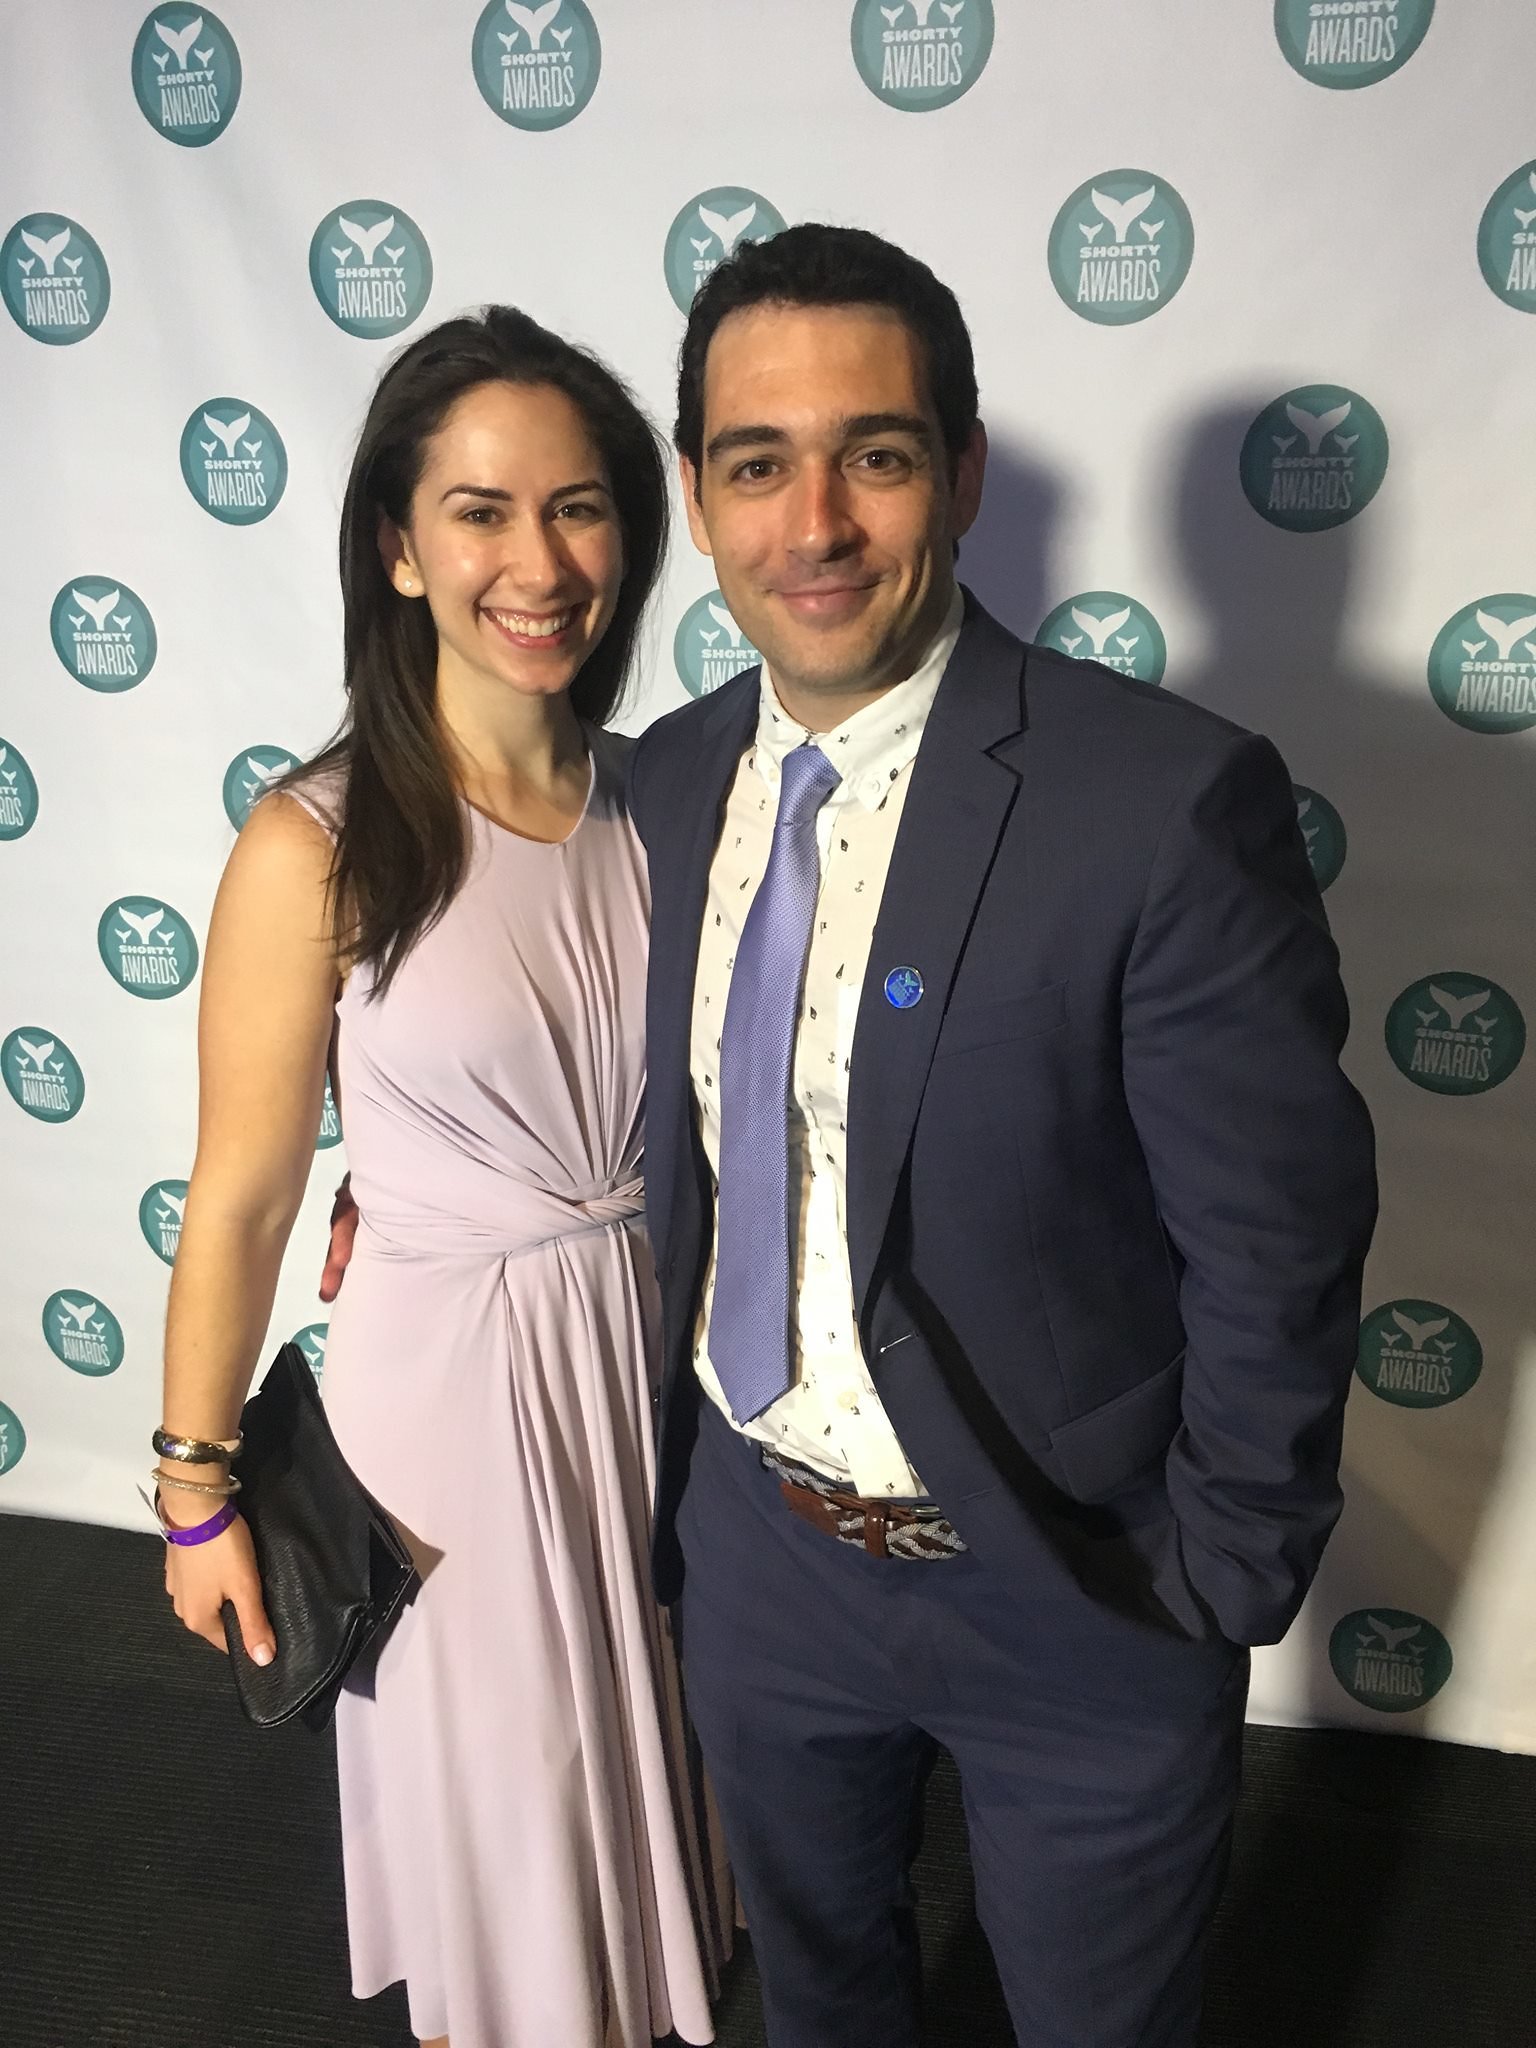 Rachel Louise Ensign and Andrew Kaczynski at the Shorty Awards on June 4, 2017 | Photo: Flickr/Some Brooklynguy